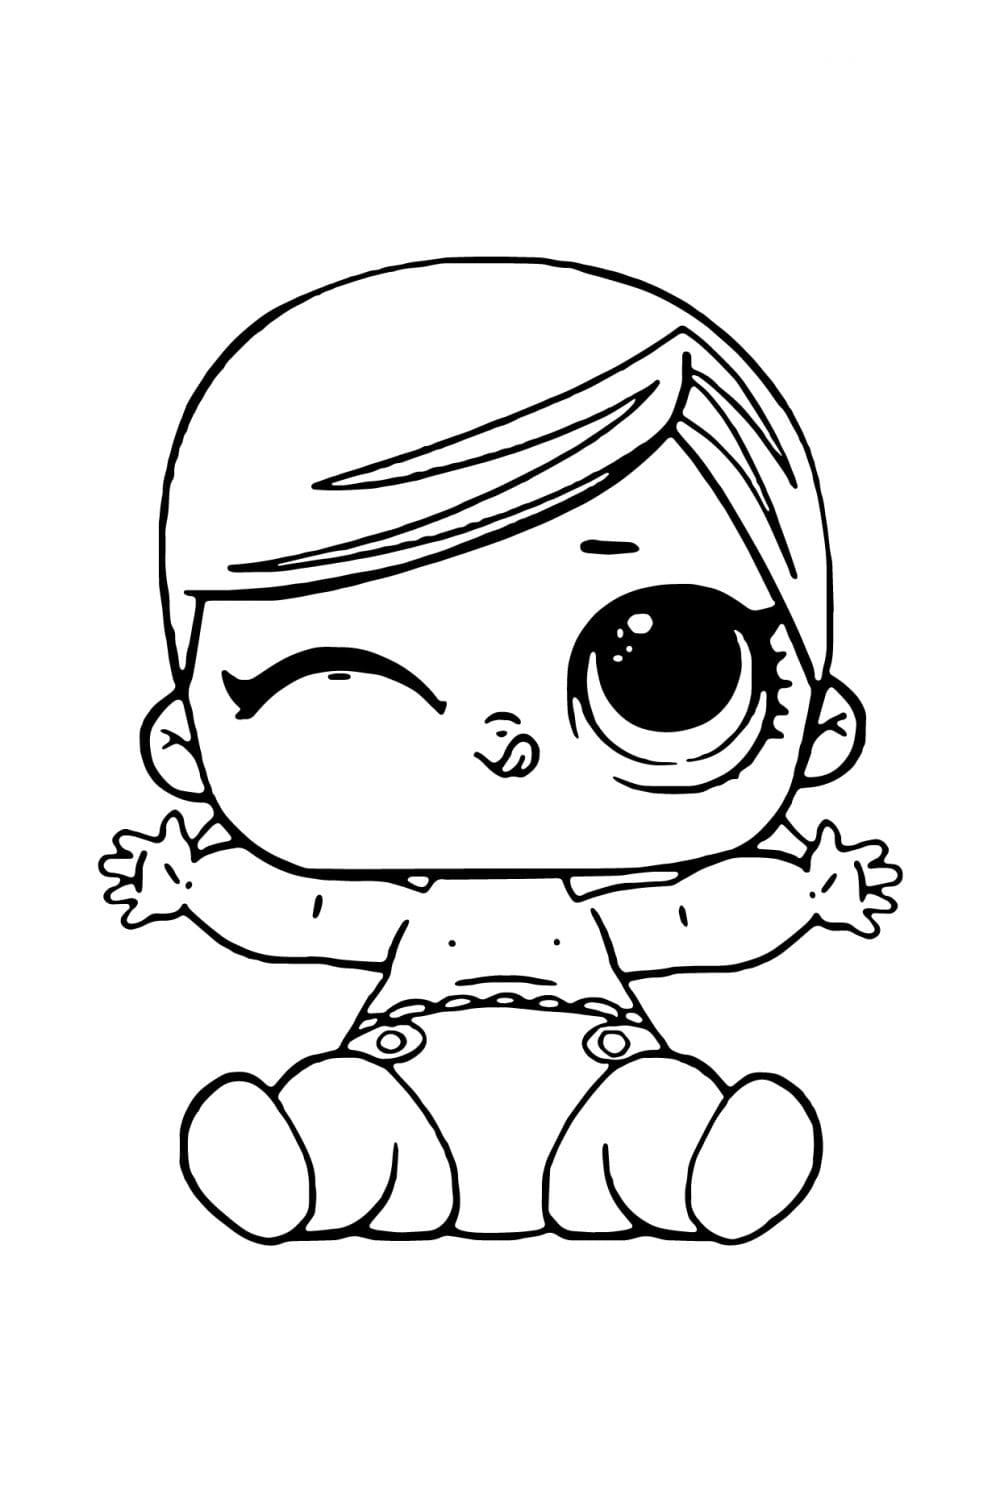 LOL Coloring Pages FREE Printable 34